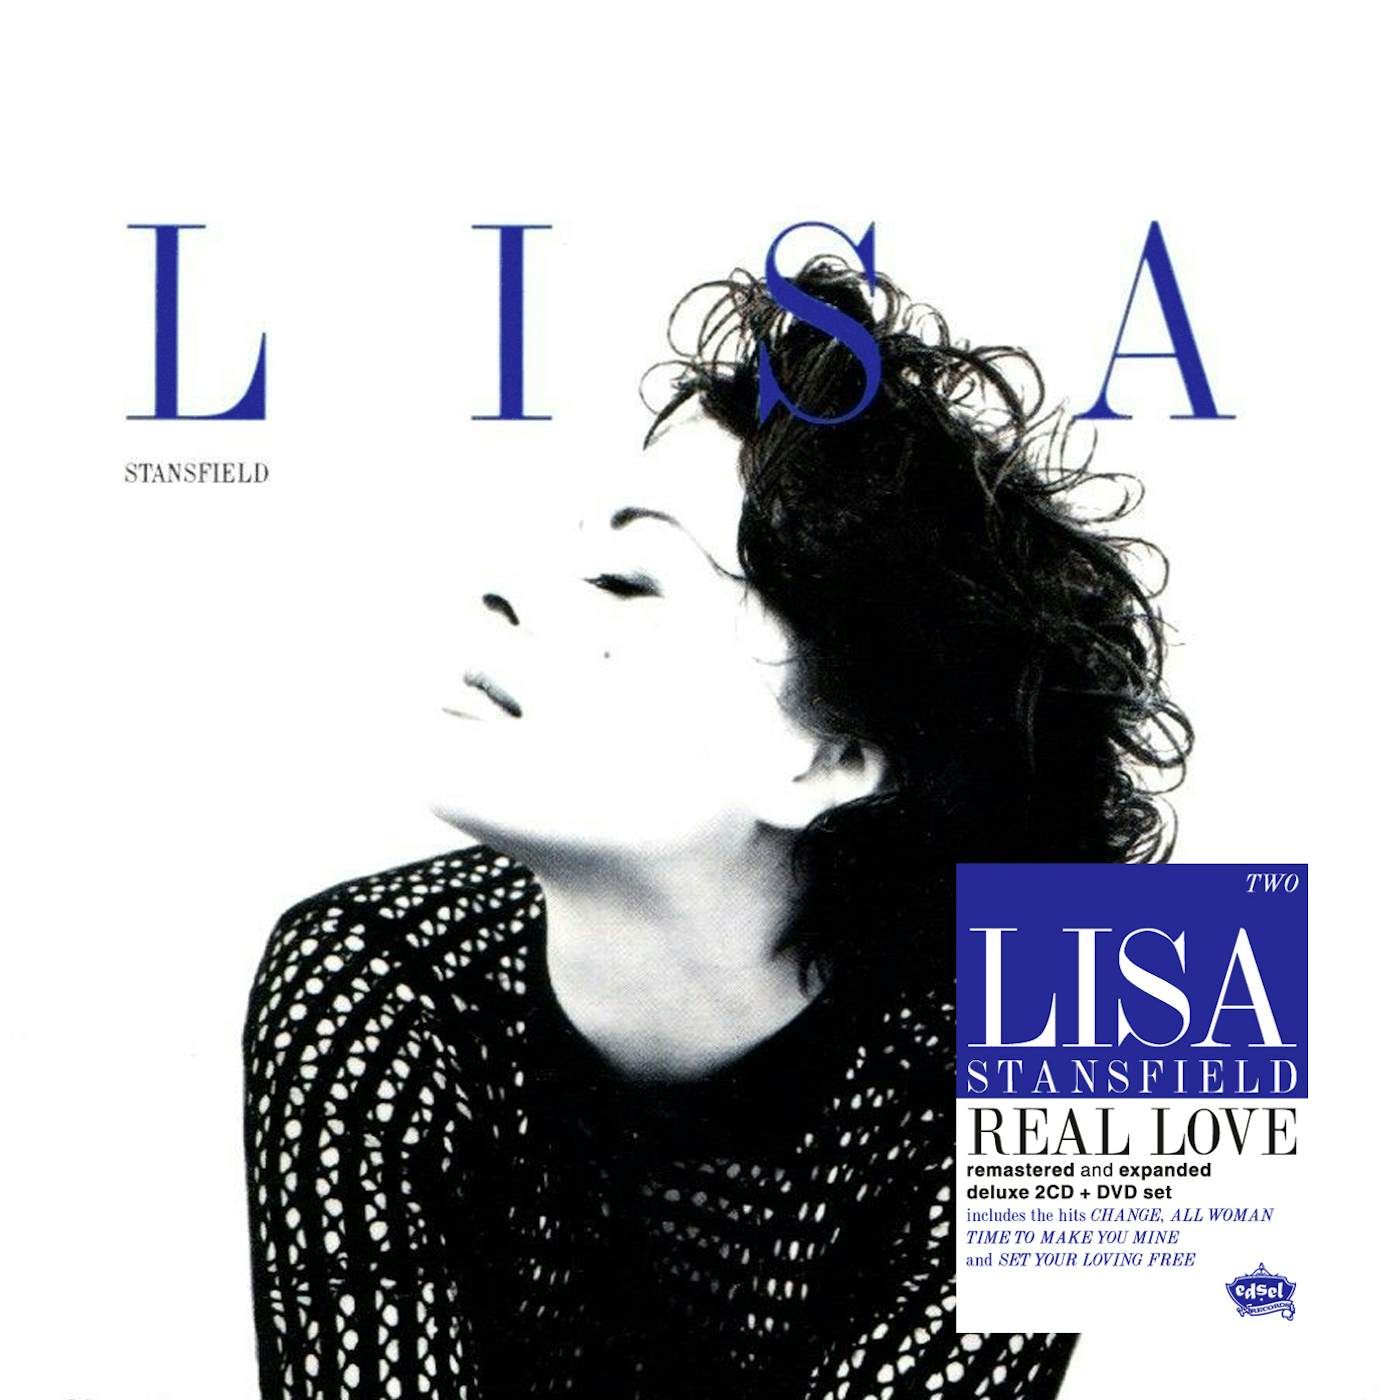 Lisa Stansfield REAL LOVE: DELUXE CD